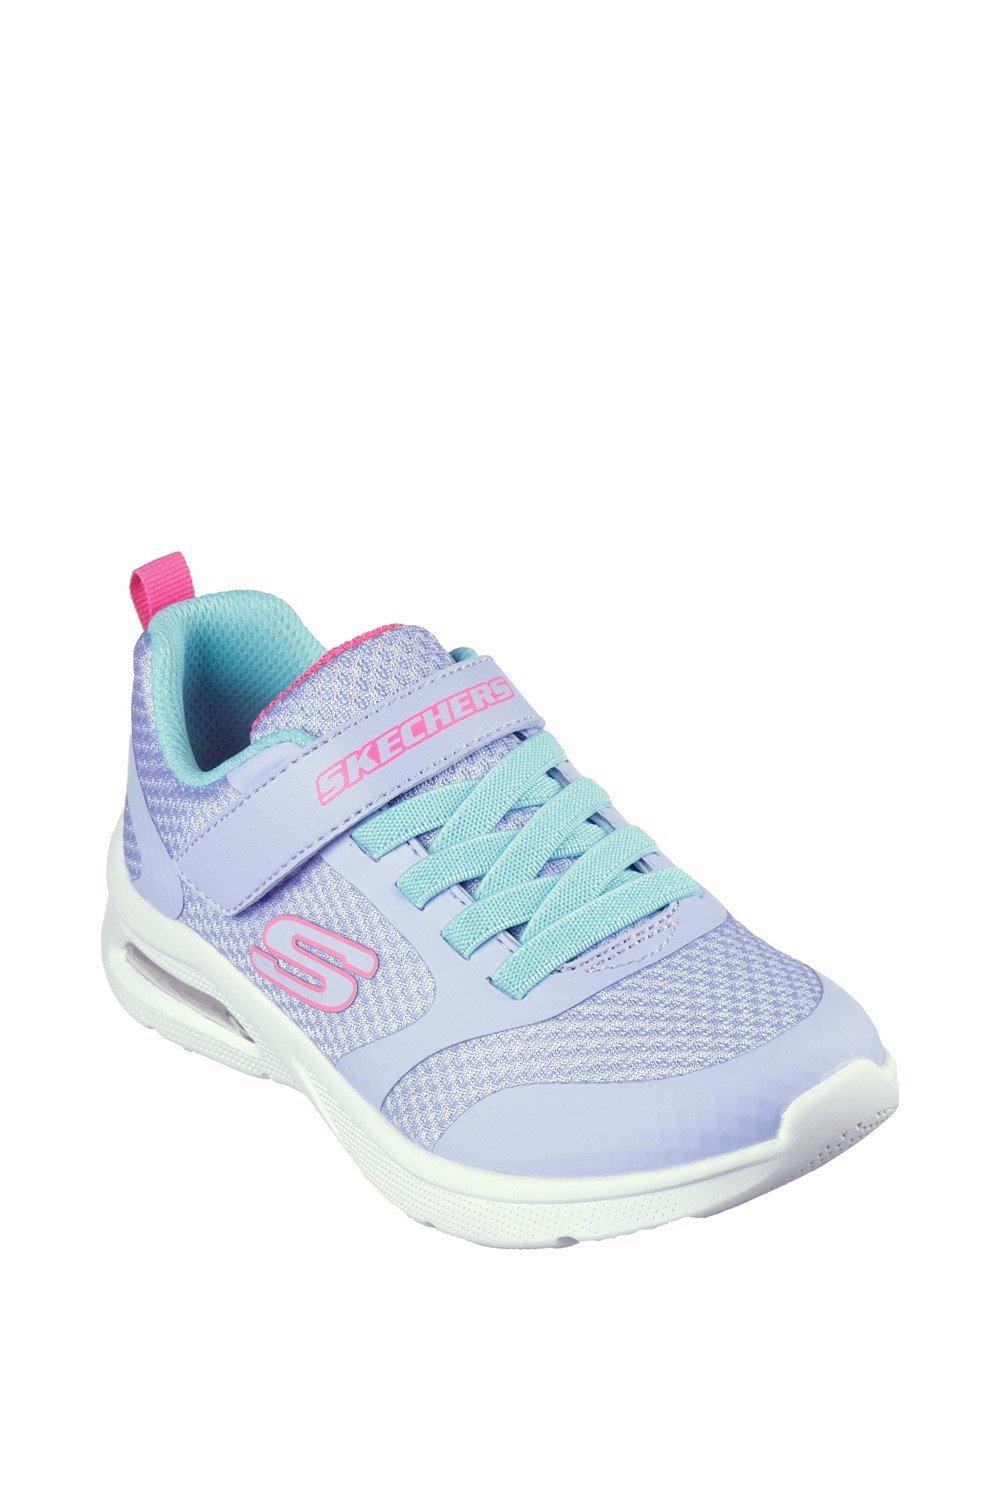 ’Microspec Max - Racer Gal’ Trainers